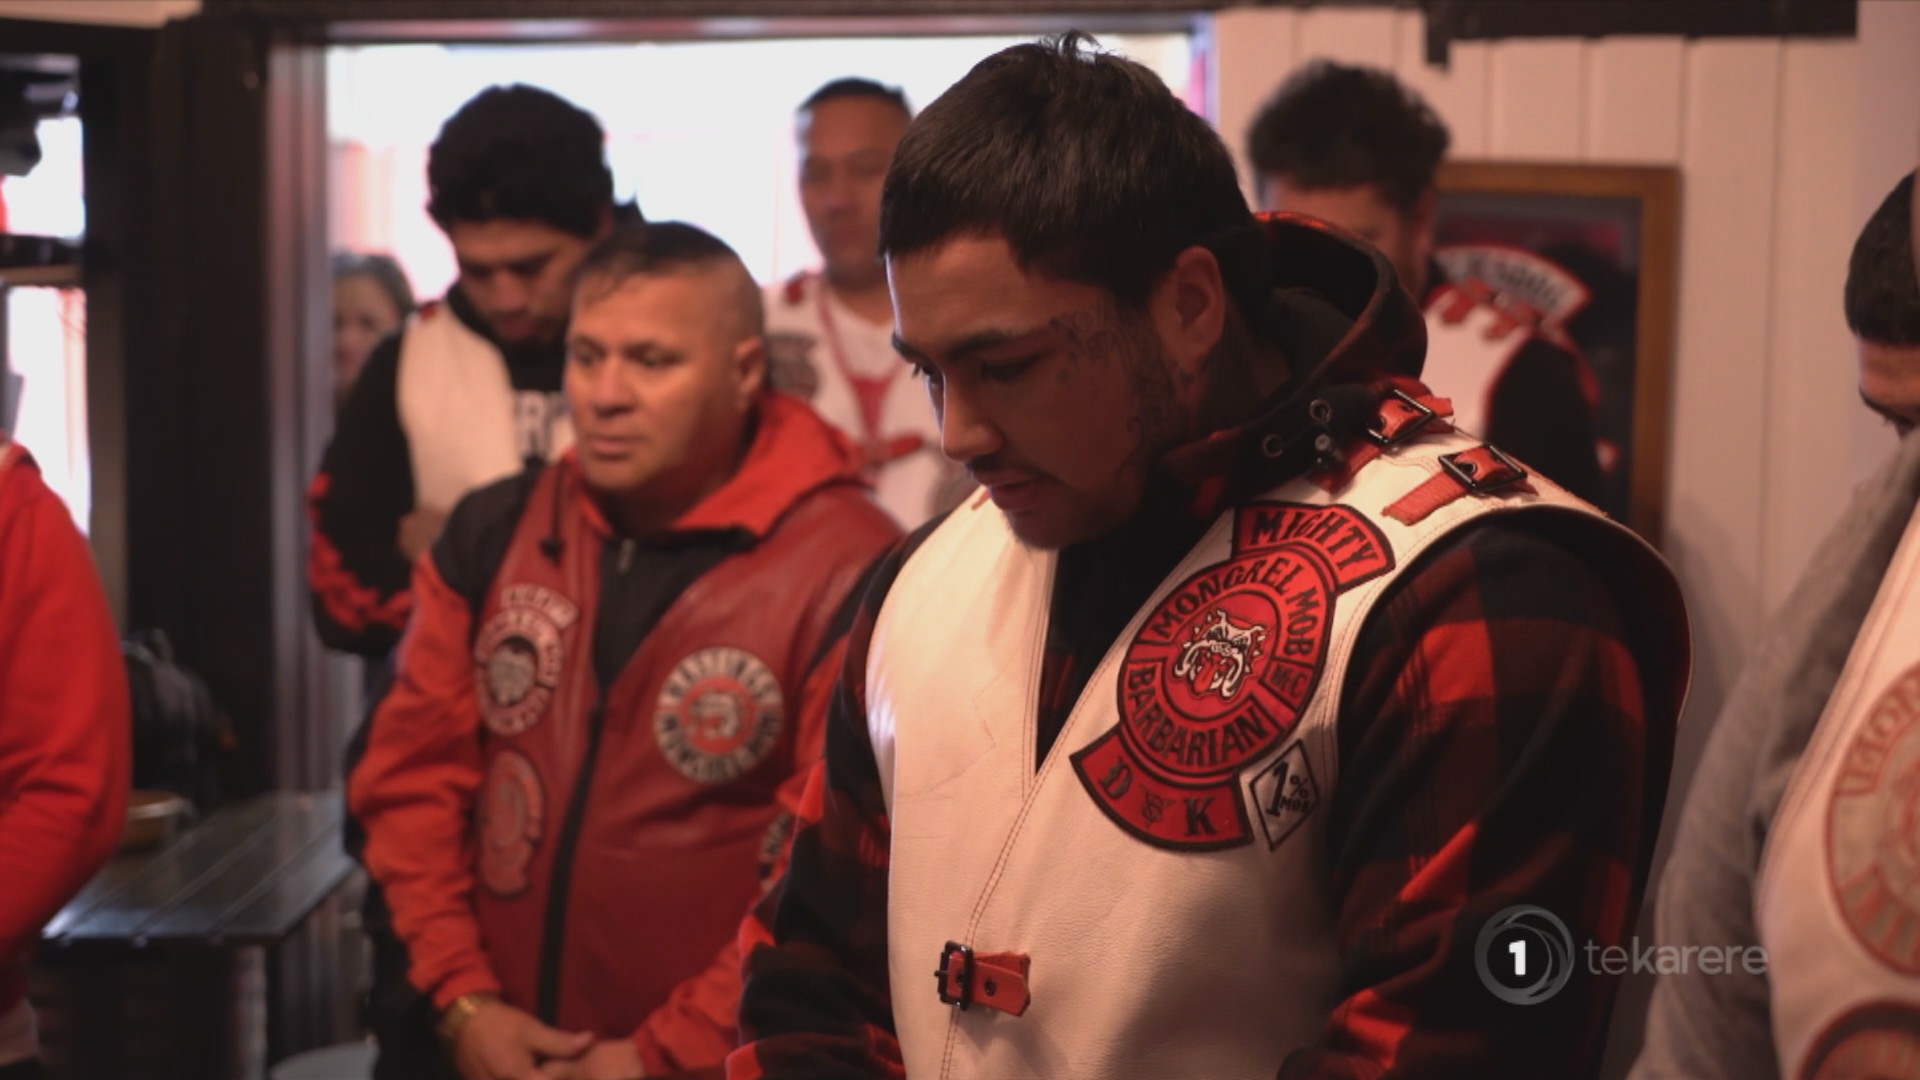 Dannevirke mongrel mob chapter aiming to keep town p free promote job opportunities